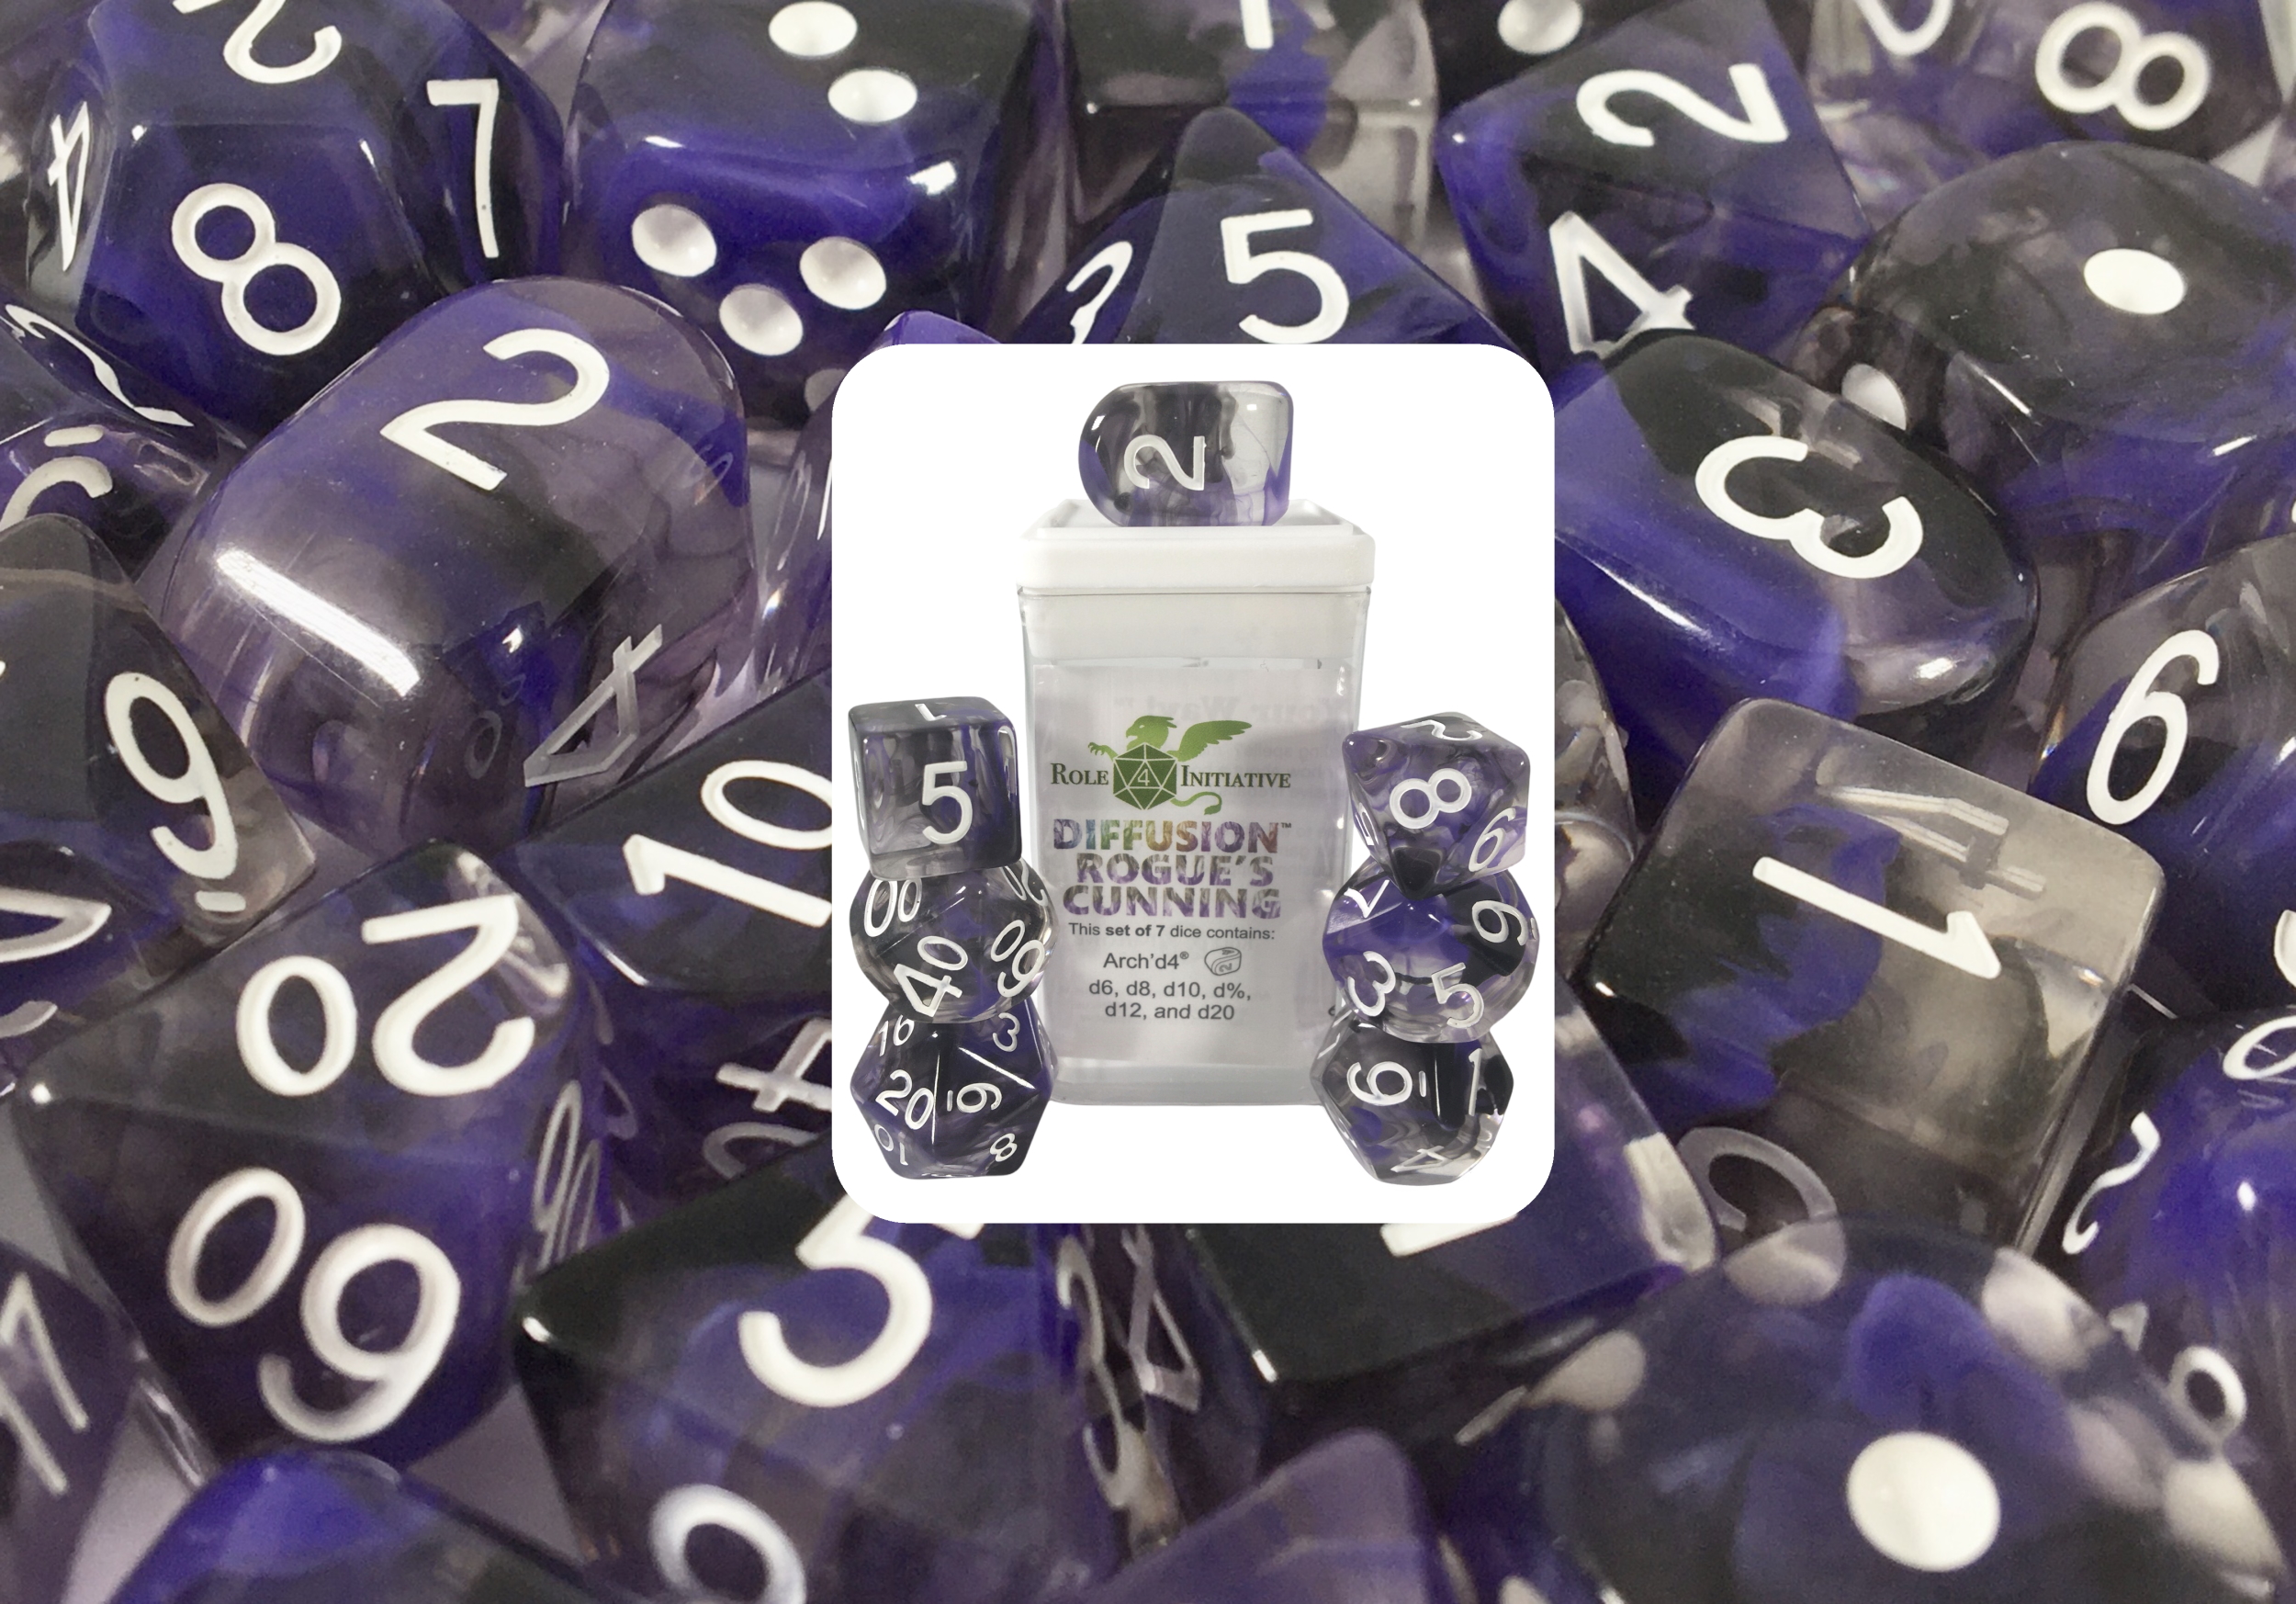 Role 4 Initiative Polyhedral 7 Dice Set: Diffusion Rogues Cunning [Arch/ Balanced] 